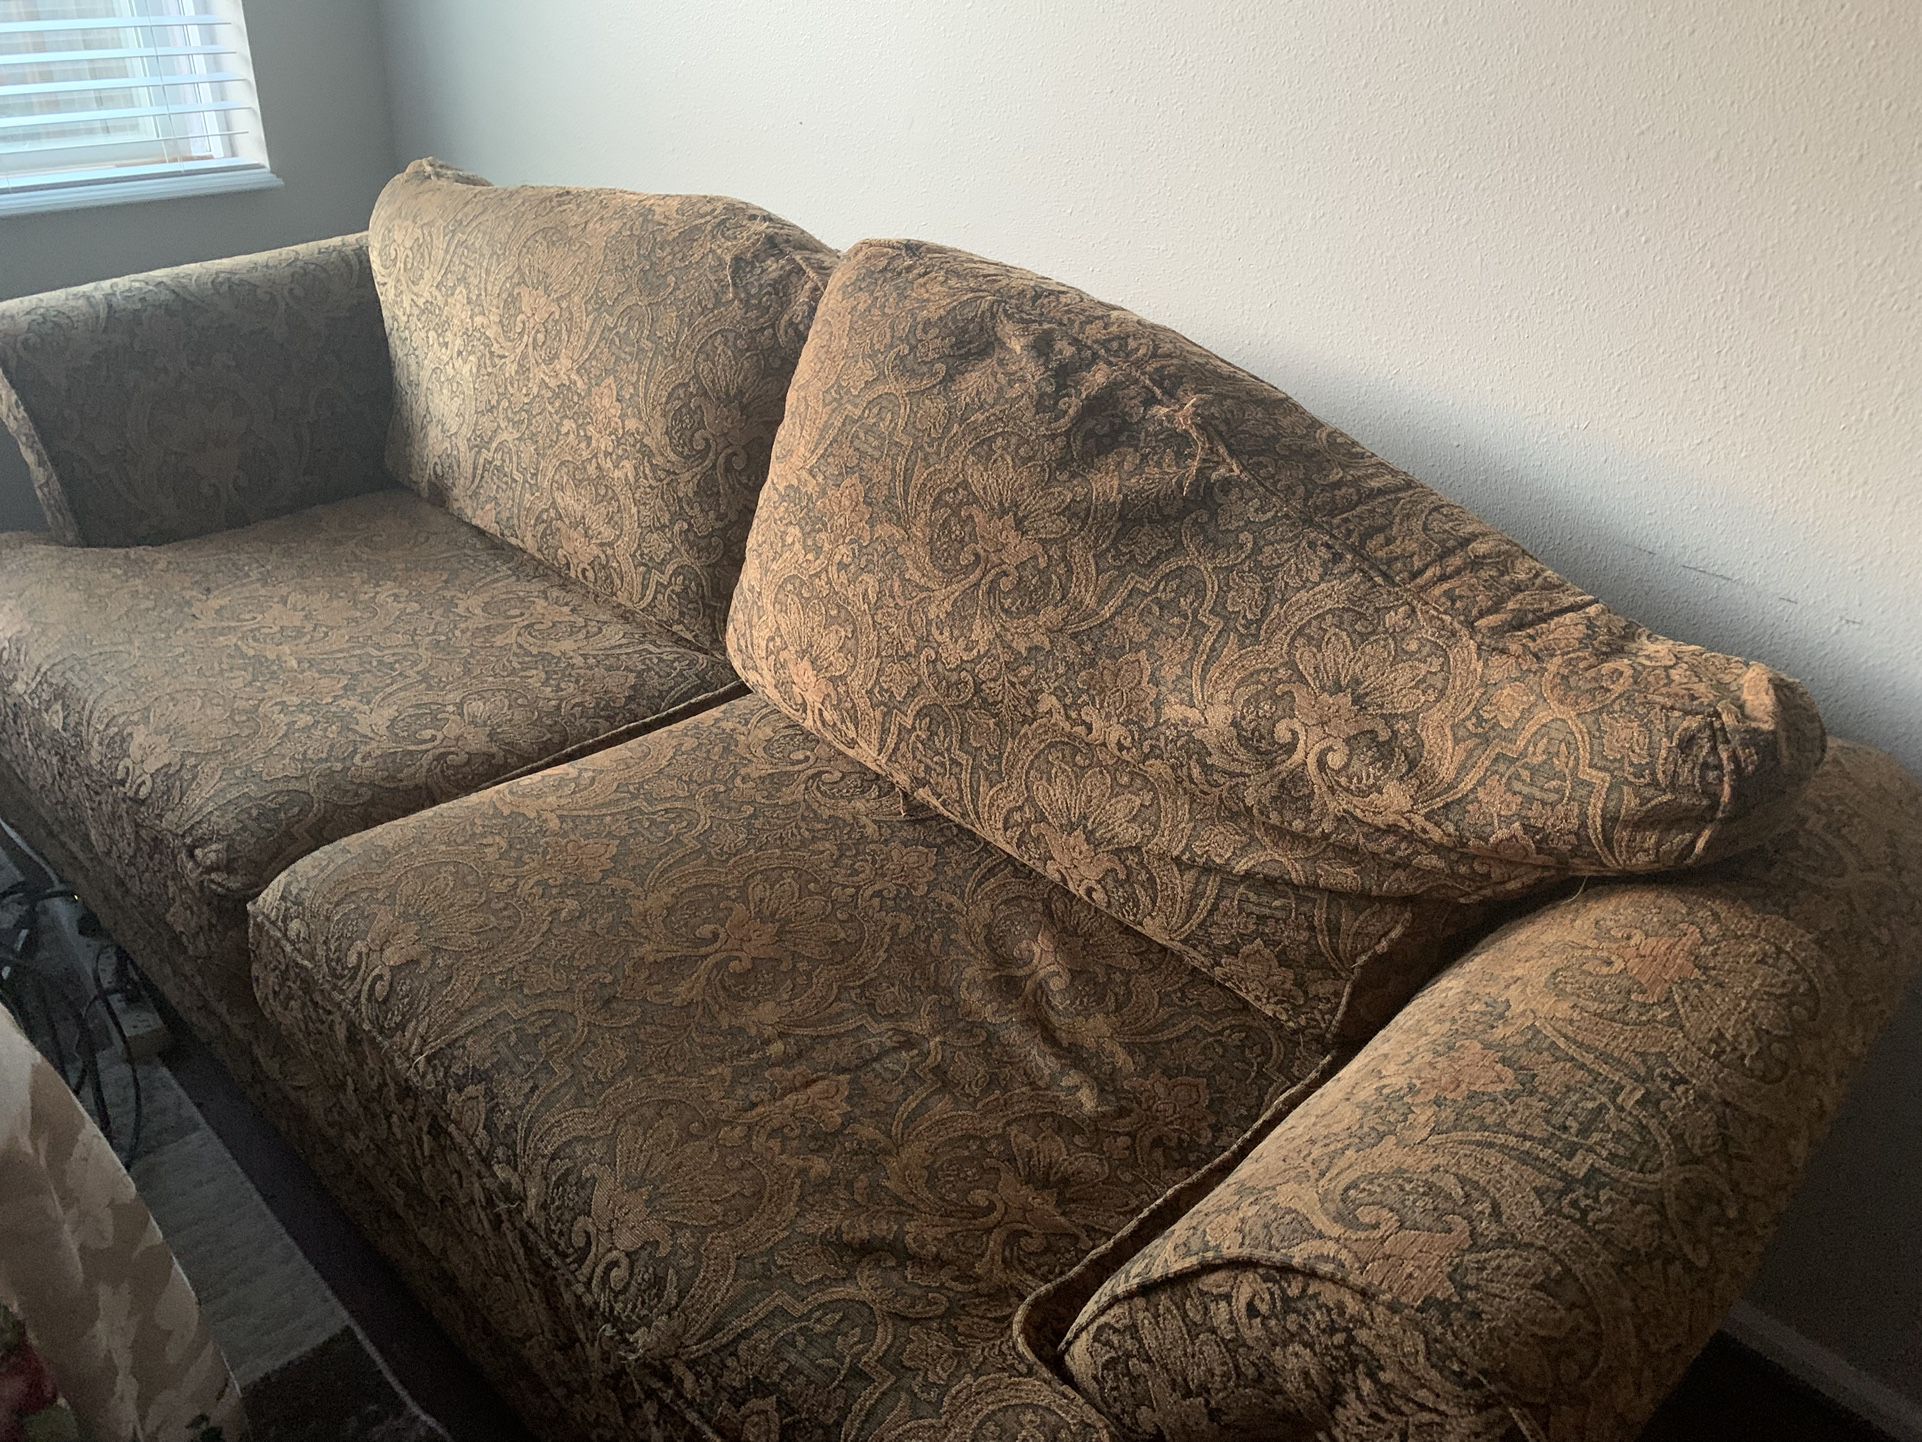 FREE Rustic Brown, Two-Seat Couch (Sofa) With Florals Pattern & Wooden Base